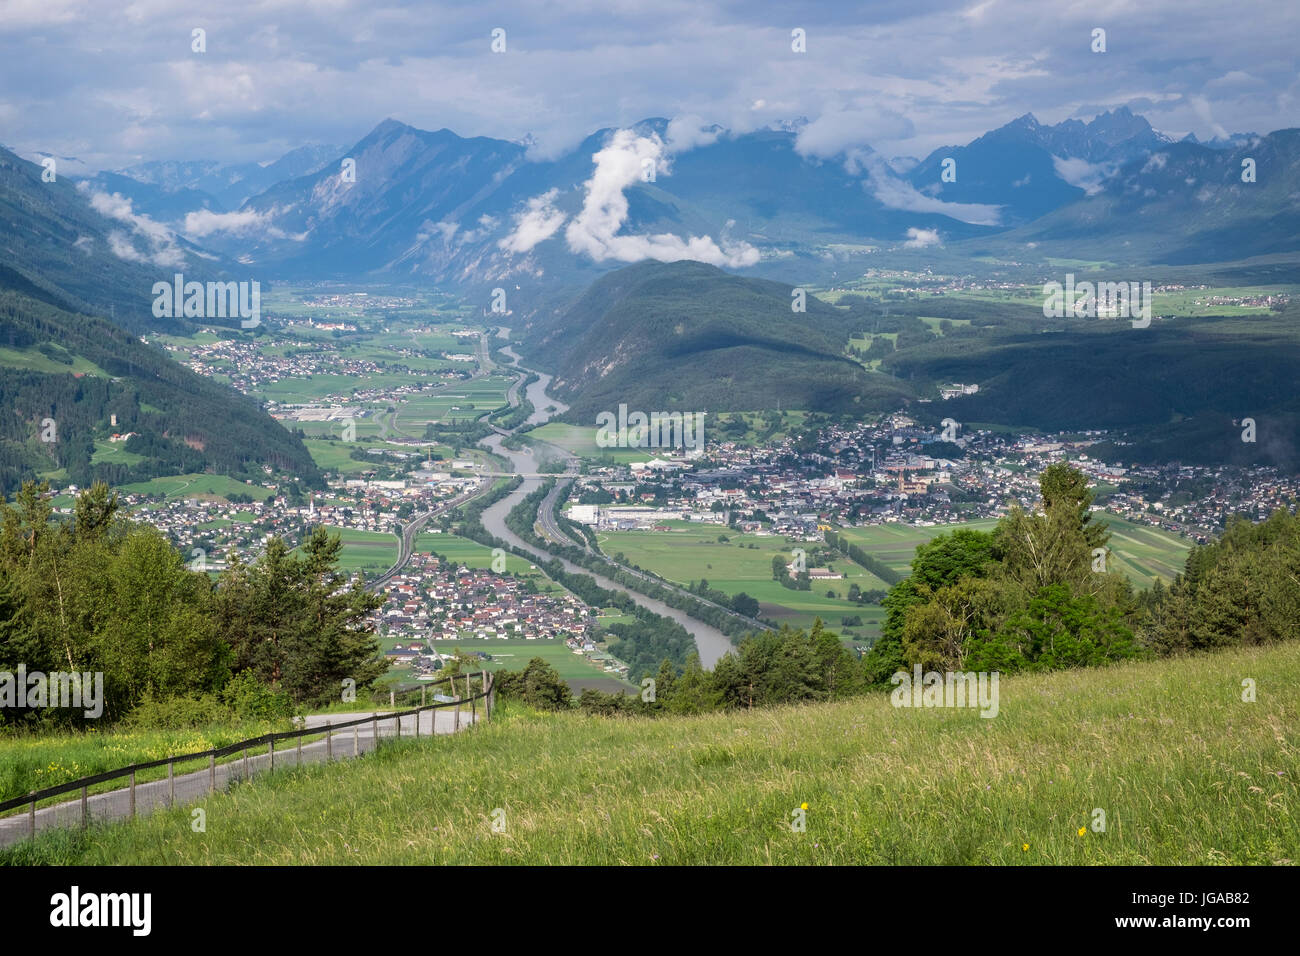 Aerial view over the town of Telfs and the Inn valley, Tyrol, Austraia Stock Photo